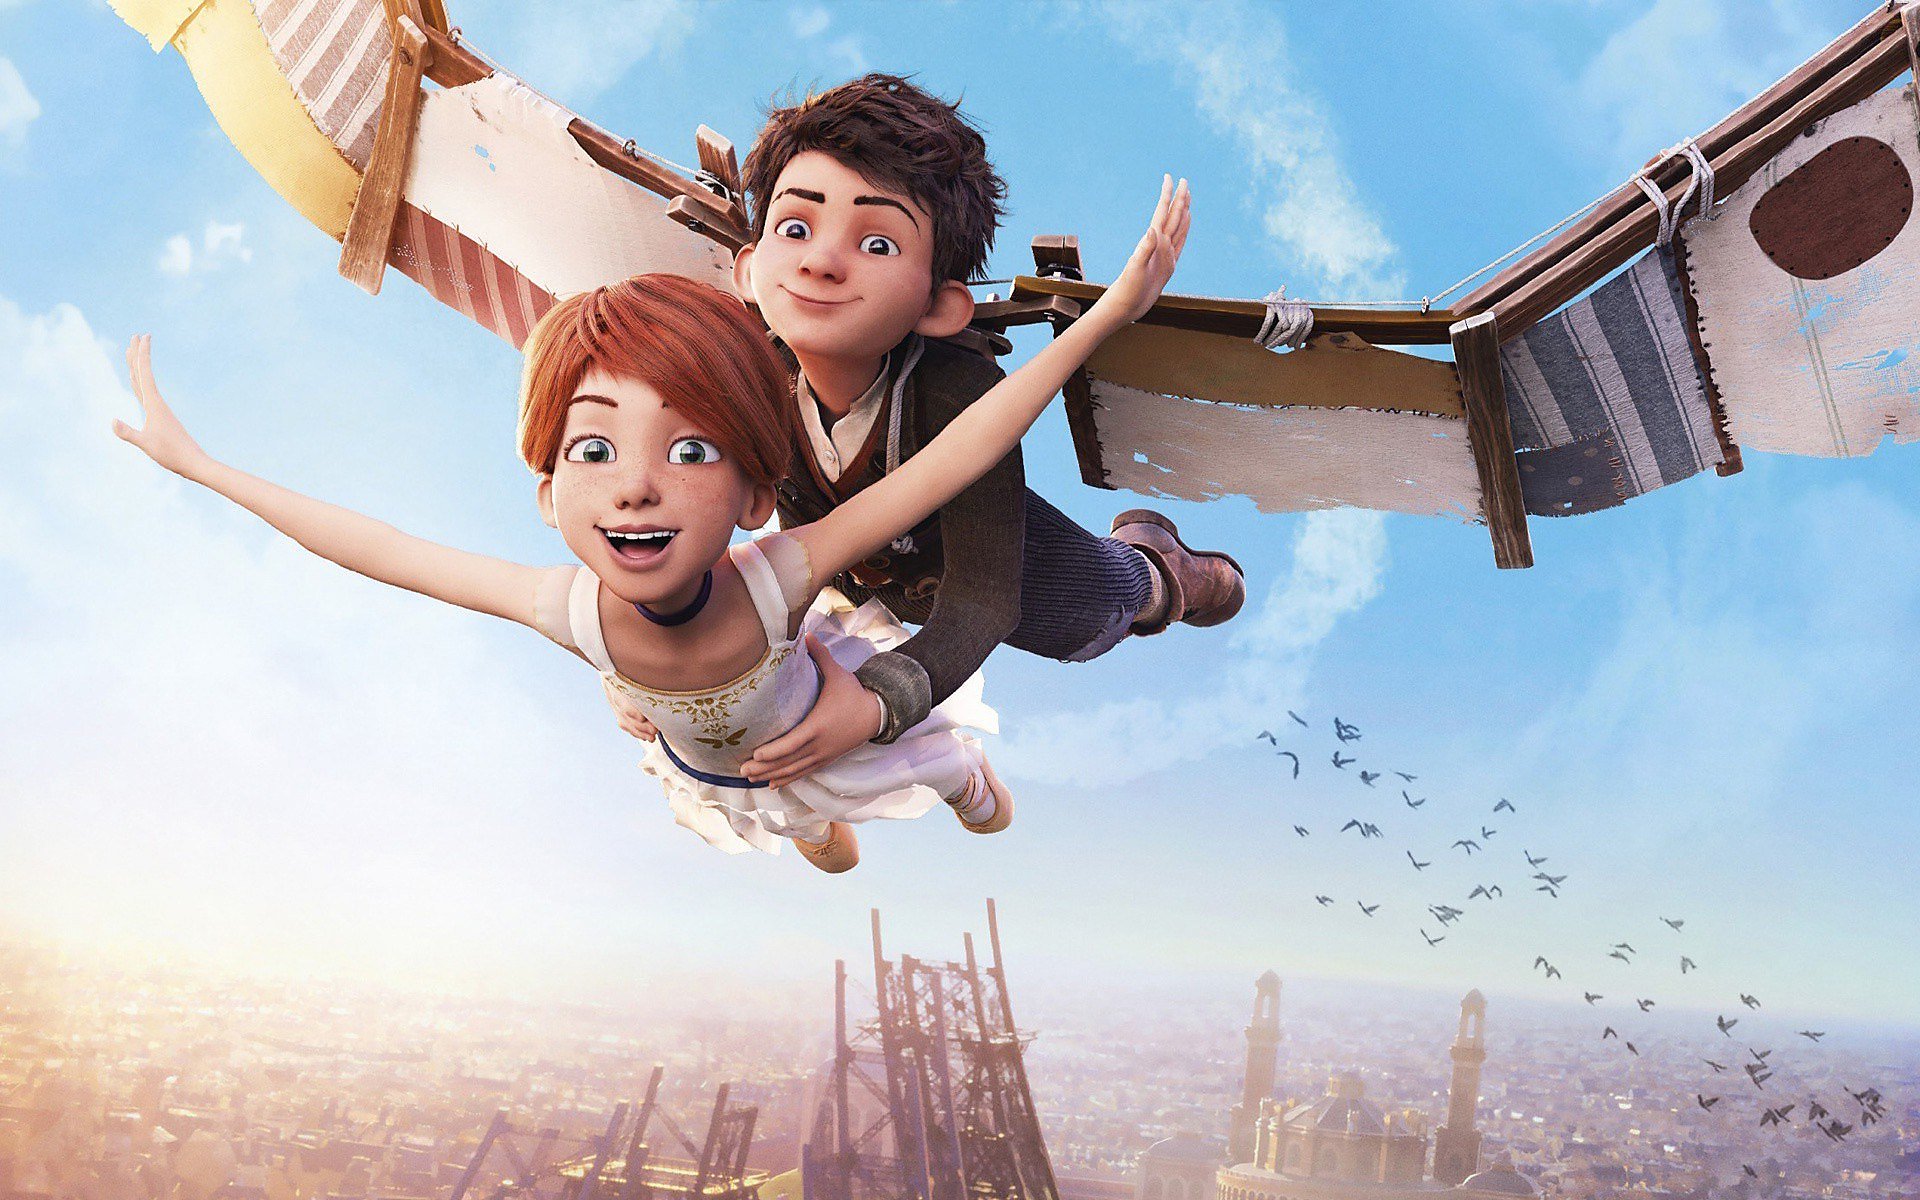 A flying ‘Leap!’ into family film inconsistency - SFGate1920 x 1200